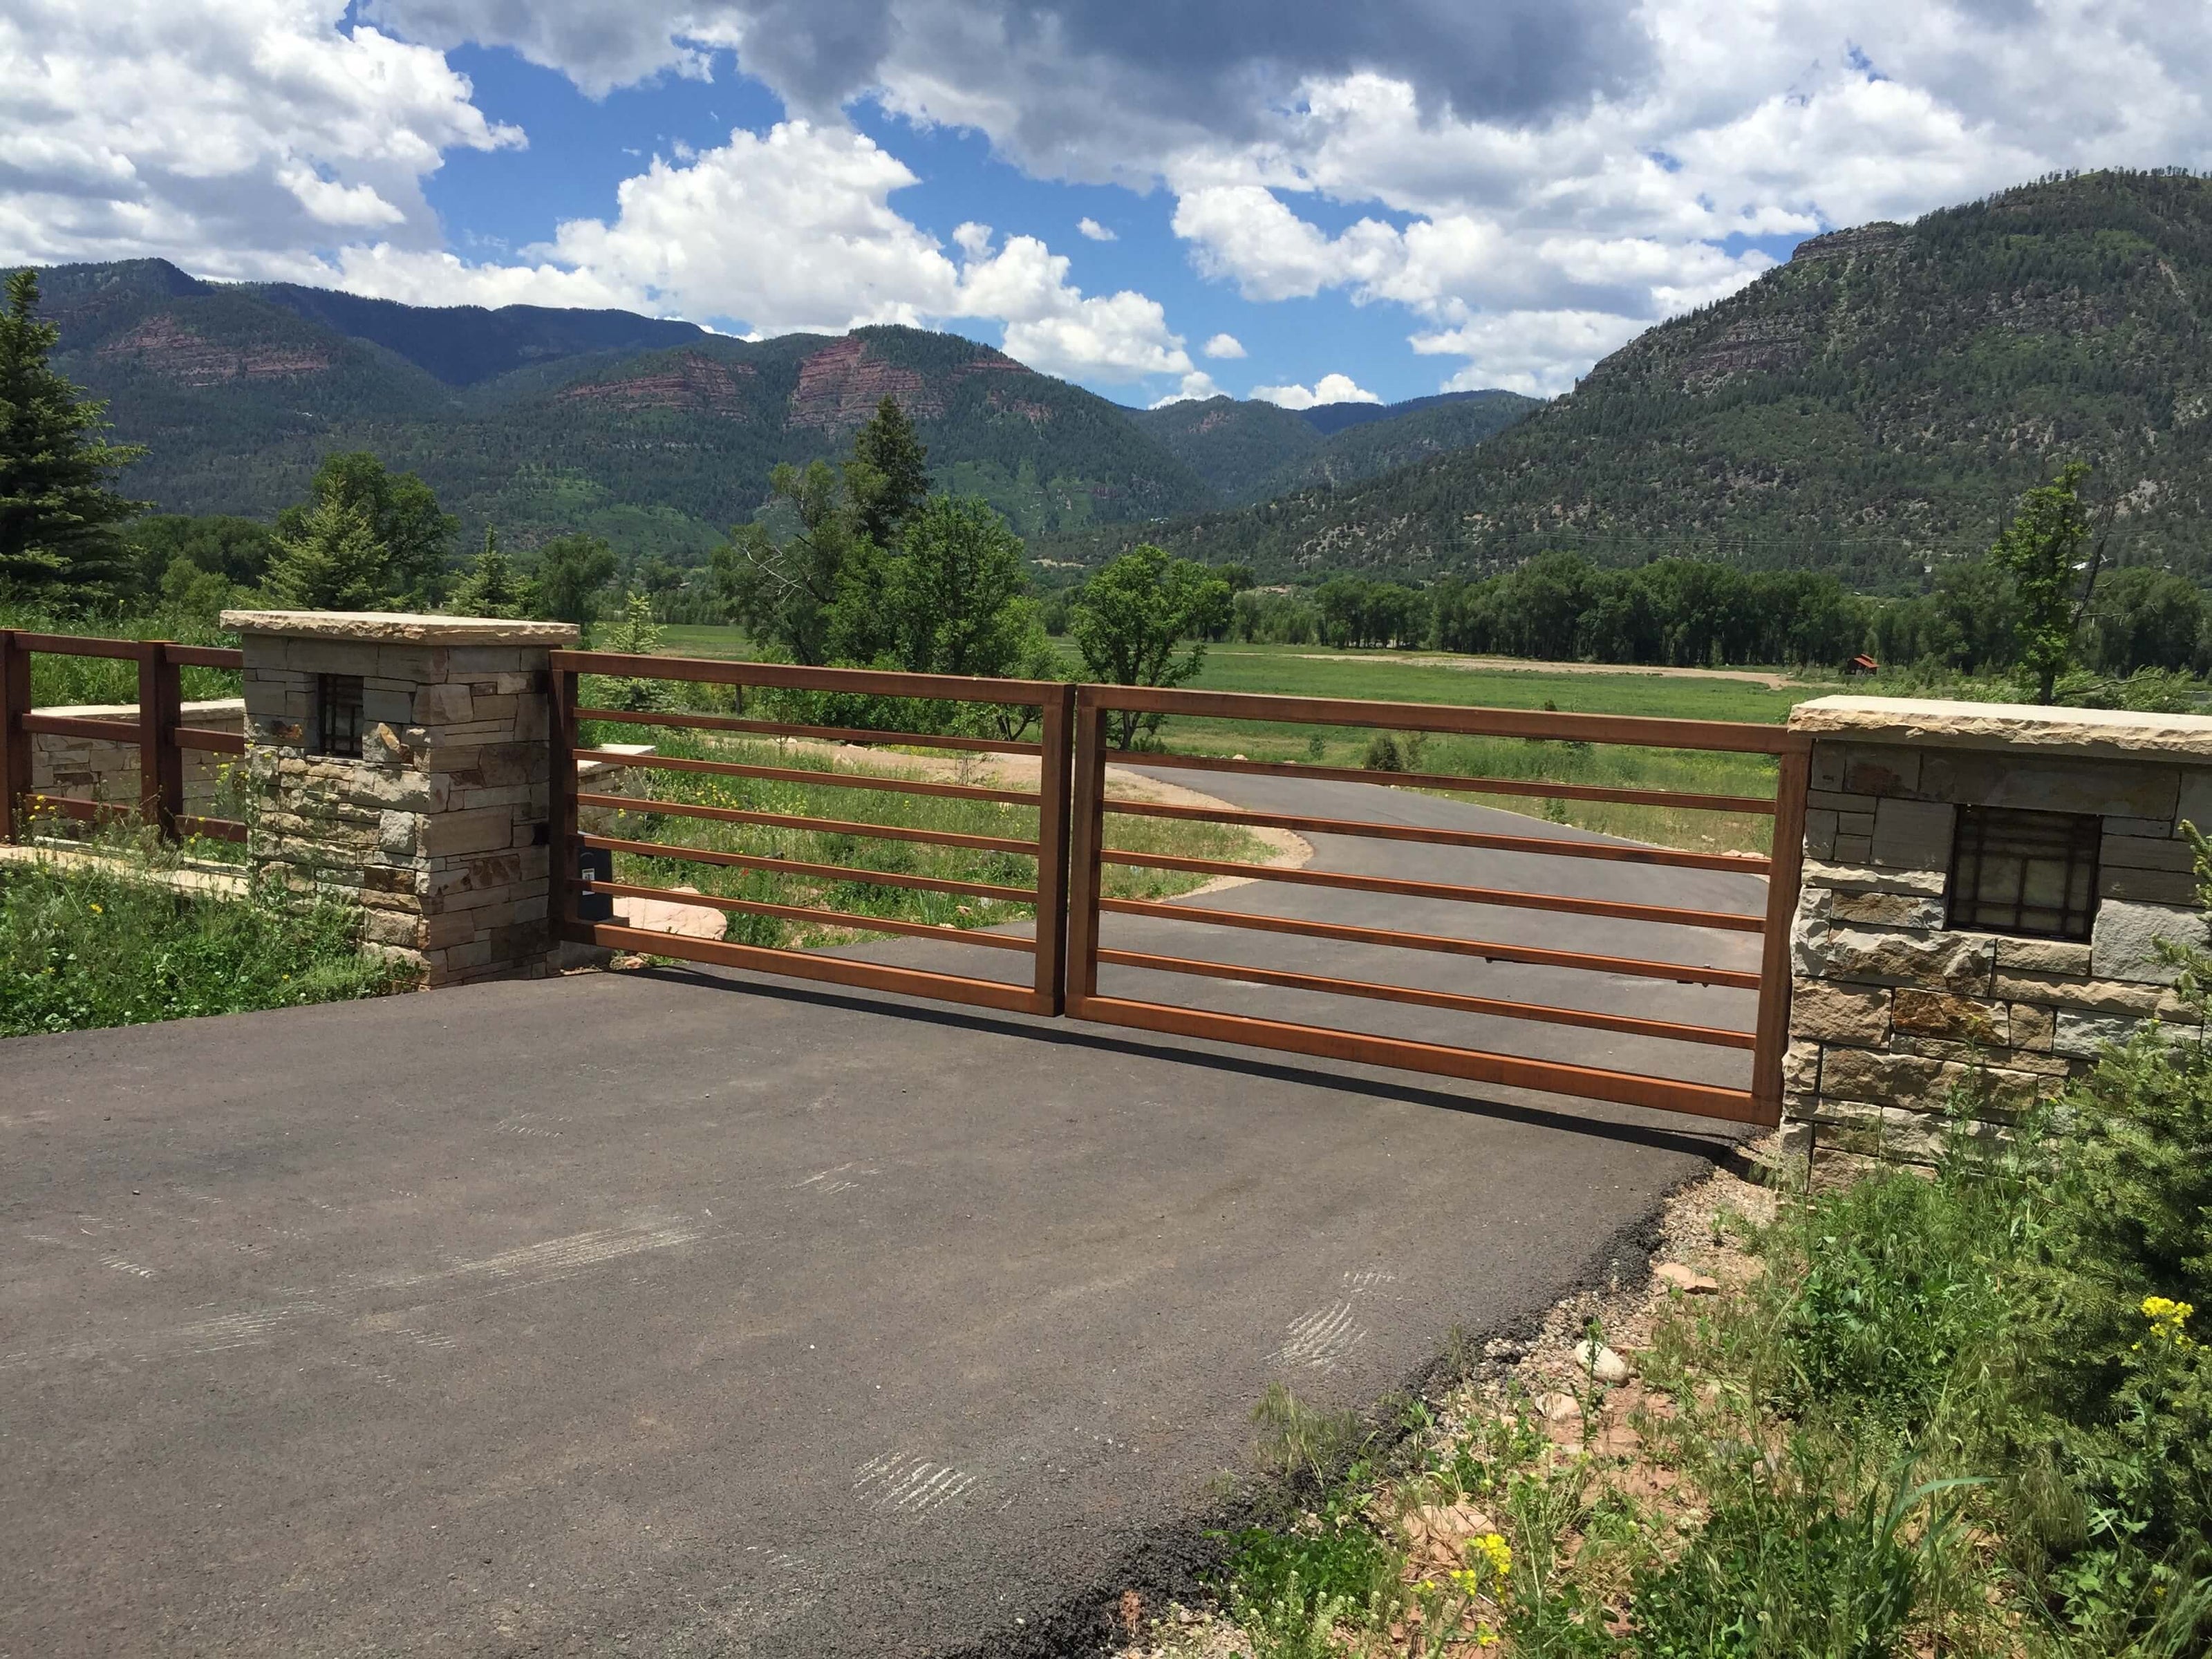 rust color metal double simple gate with horizontal bars in rectangular frame hinged to square stacked stone columns with inset craftsman style lights on paved road in green vallley, red rock mountains in background